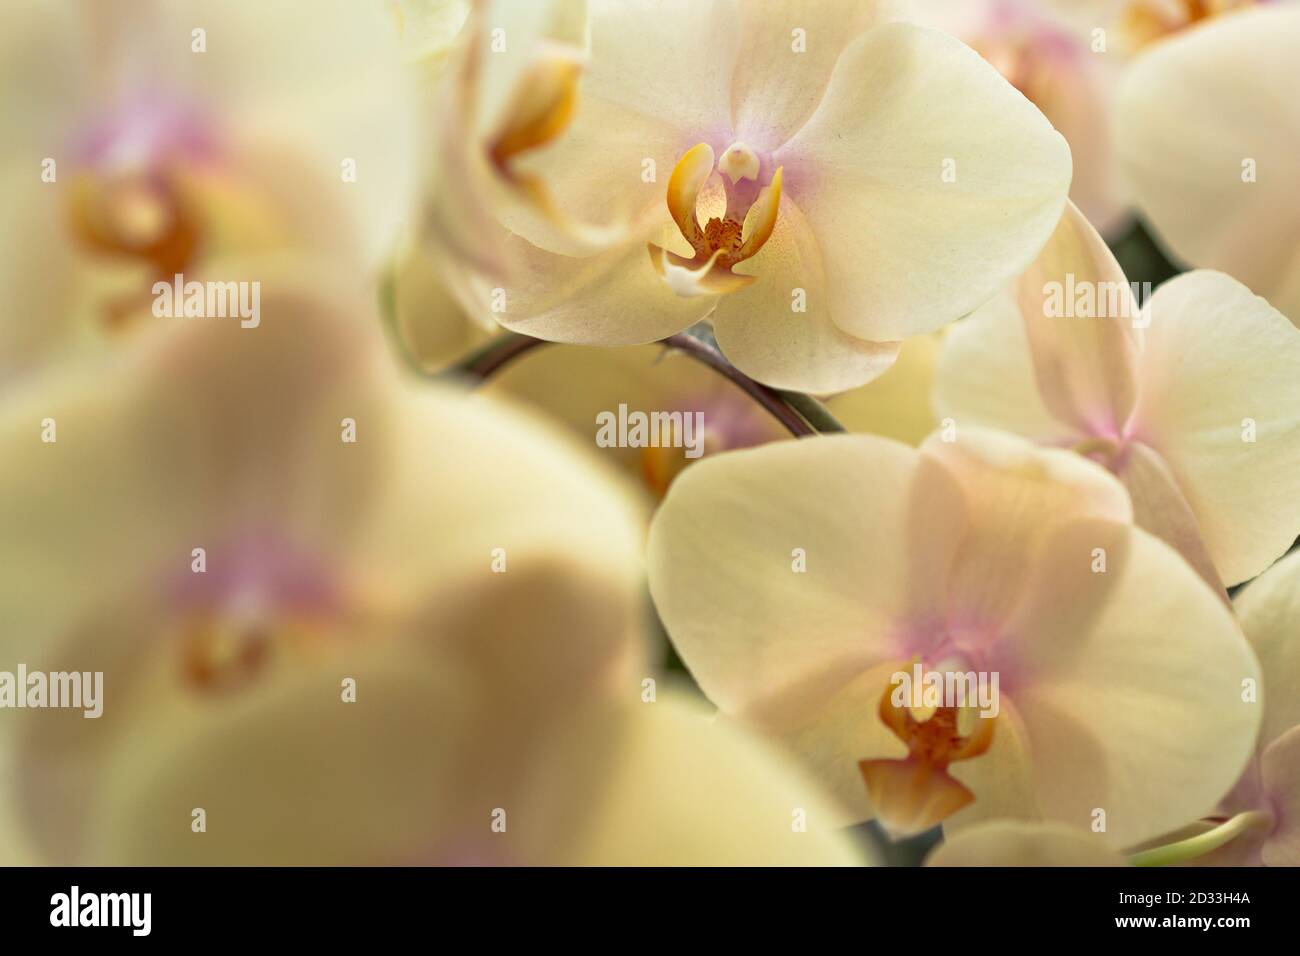 Dense Bouquet Of Yellow Phalaenopsis Orchid Stock Photo